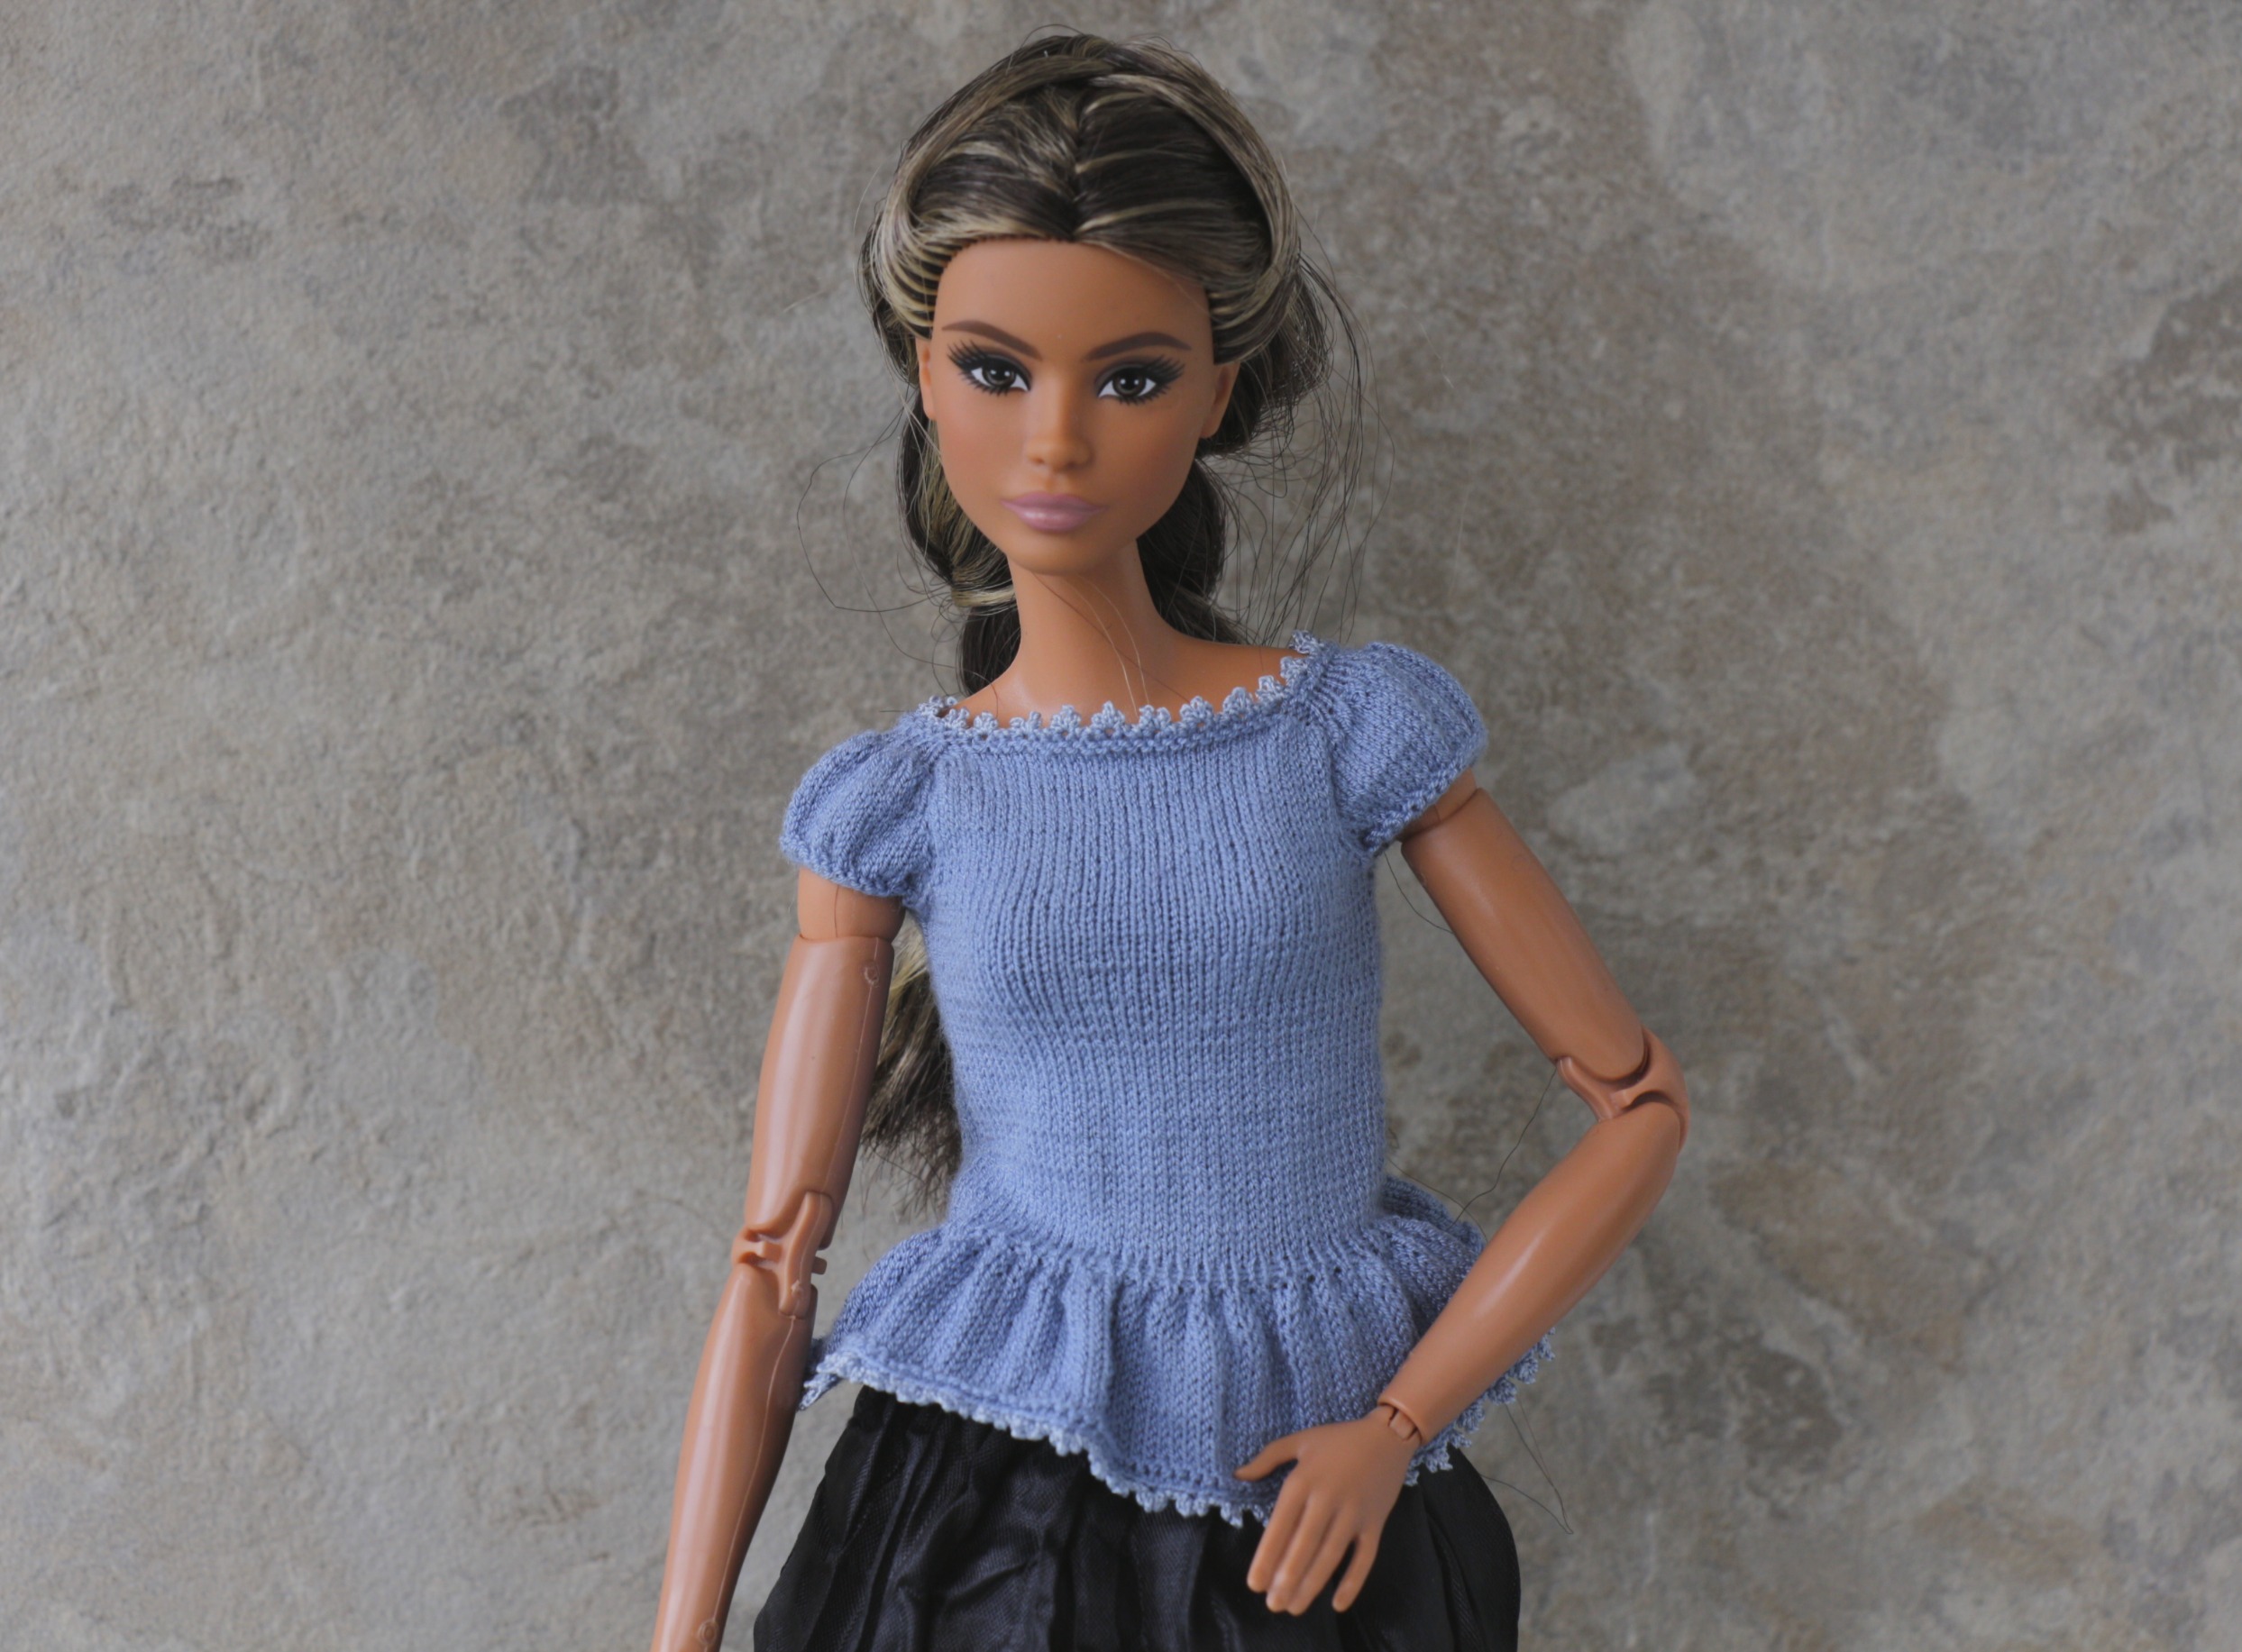 Barbie Made to Move Barbie Doll, Blue Top - Barbie Collectibles